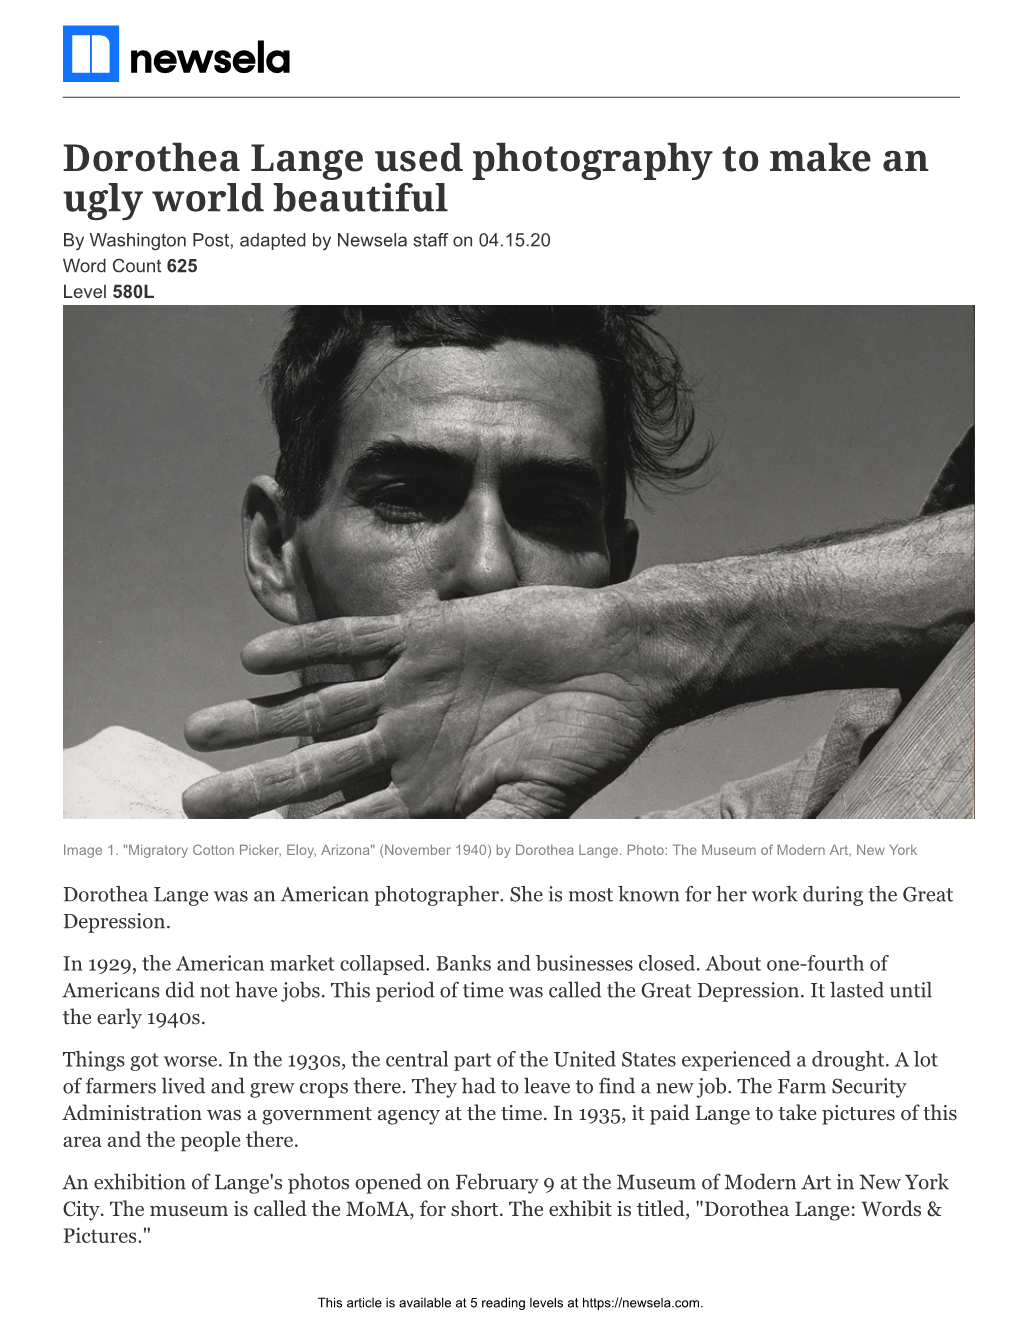 Dorothea Lange Used Photography to Make an Ugly World Beautiful by Washington Post, Adapted by Newsela Staff on 04.15.20 Word Count 625 Level 580L